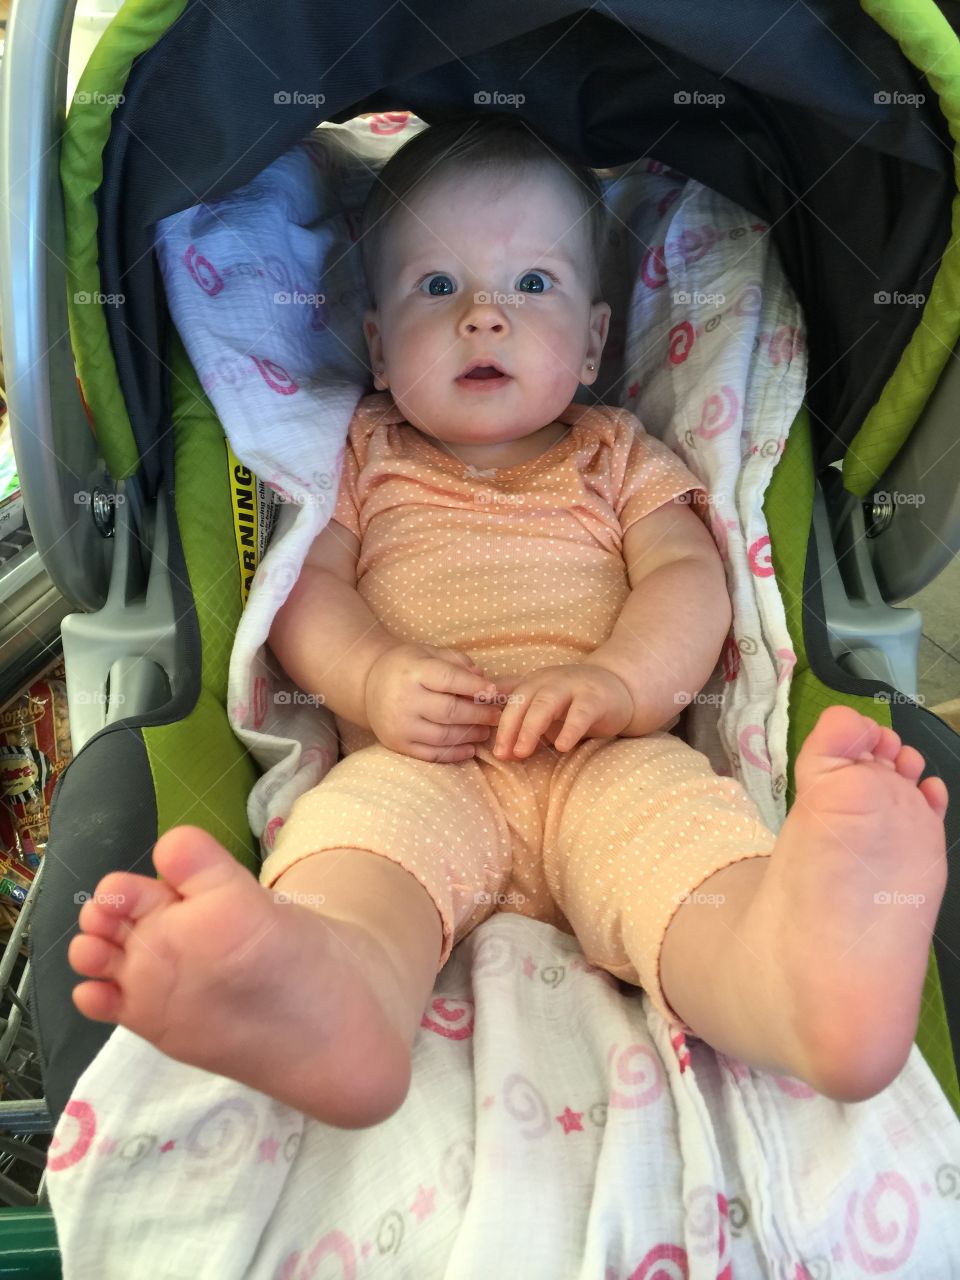 Kaydence feetsies . Kaydence shopping with mommy at the grocery store